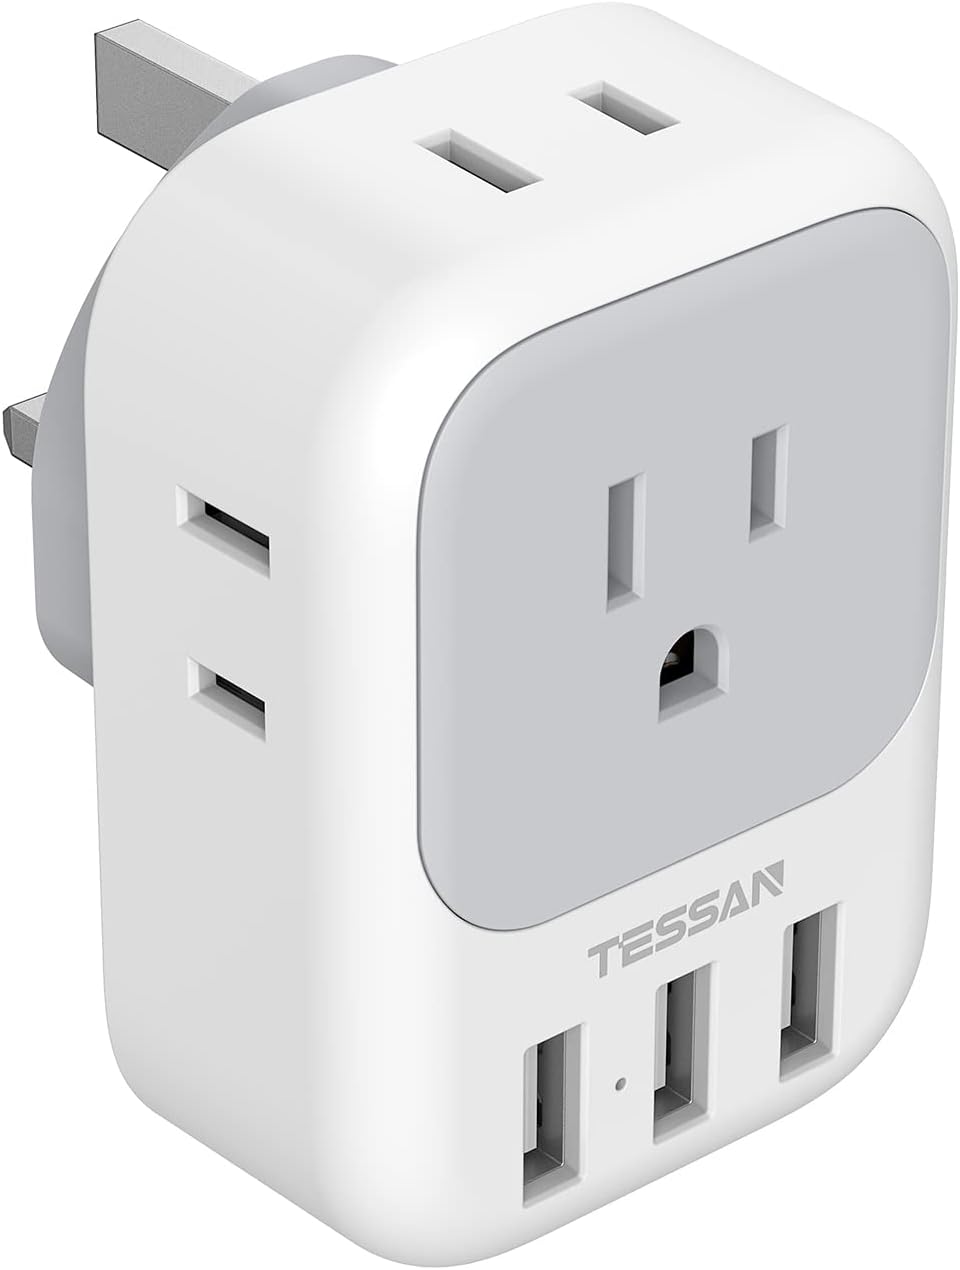 Recently took a trip to Germany and used this everywhere. I am not exaggerating. I used it in our room, the train anywhere I needed to plug in and they had a place I could get electricity. I loved that it has the USB outlets, it made life so easy. I will definitely use this brand again for international travel.